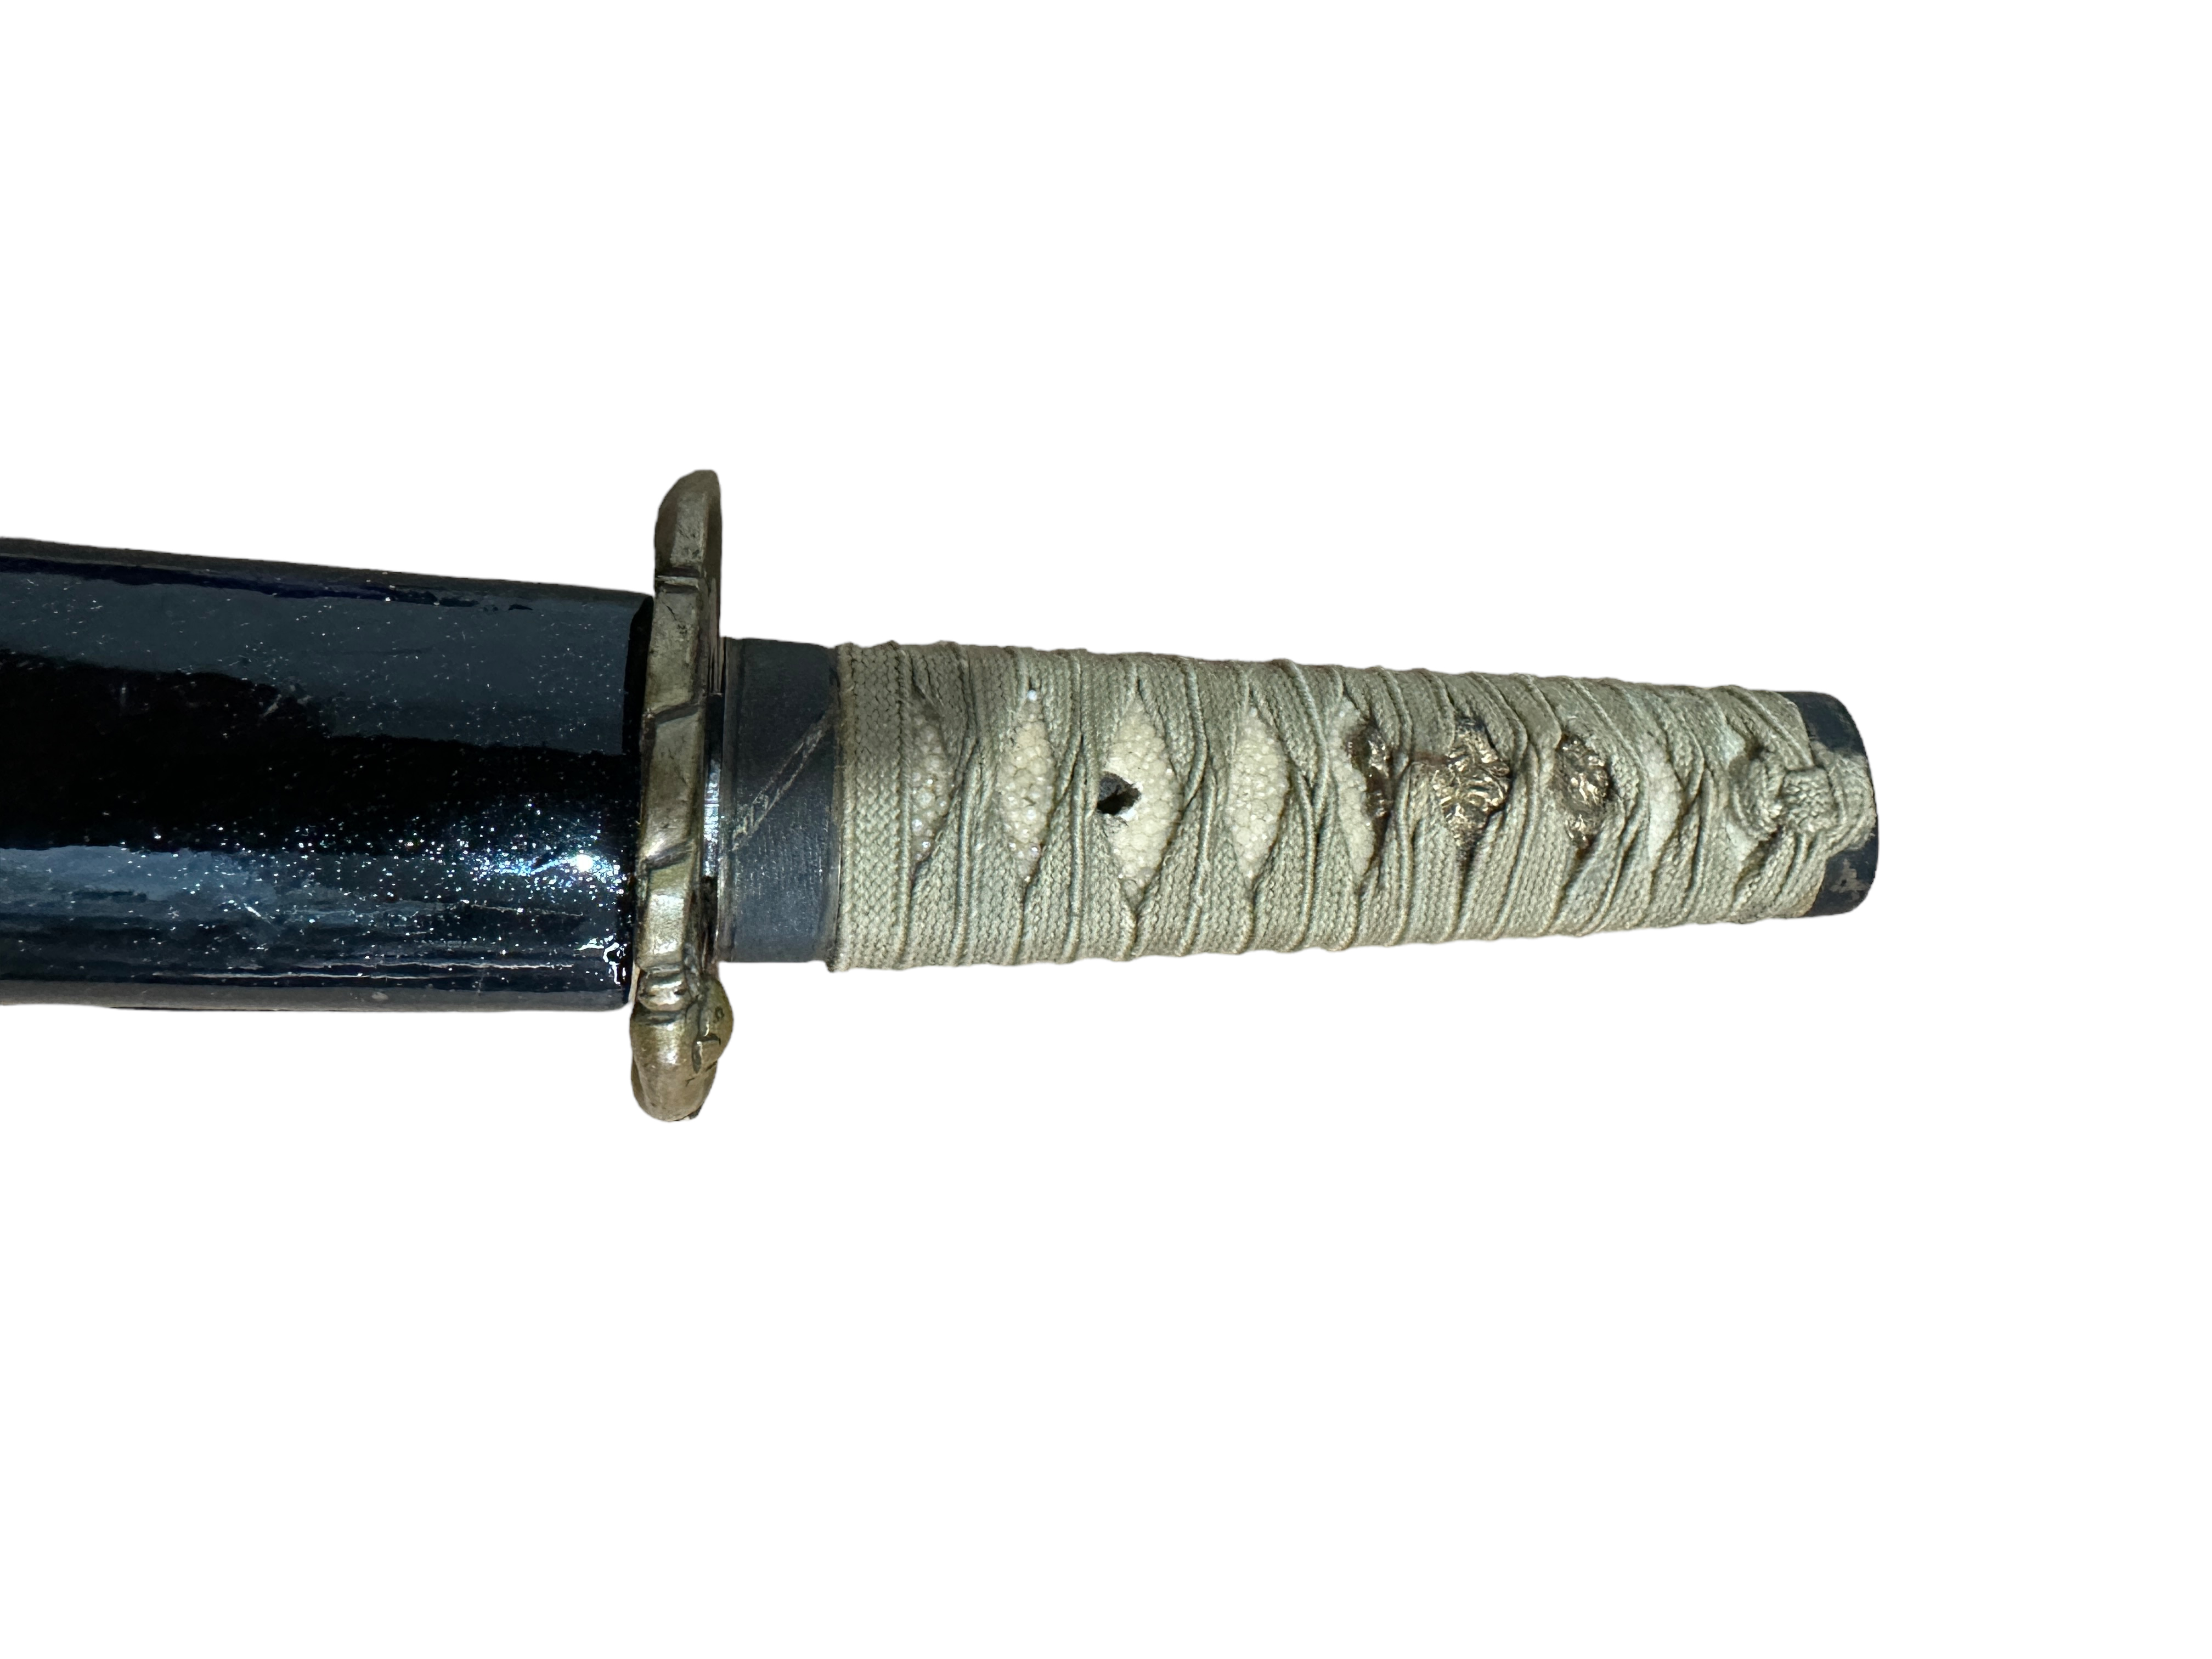 Antique Japanese Tanto Sword - 18 1/4" (46.5cm) overall with a blade of 12 1/2" (32cm) long. - Image 2 of 11